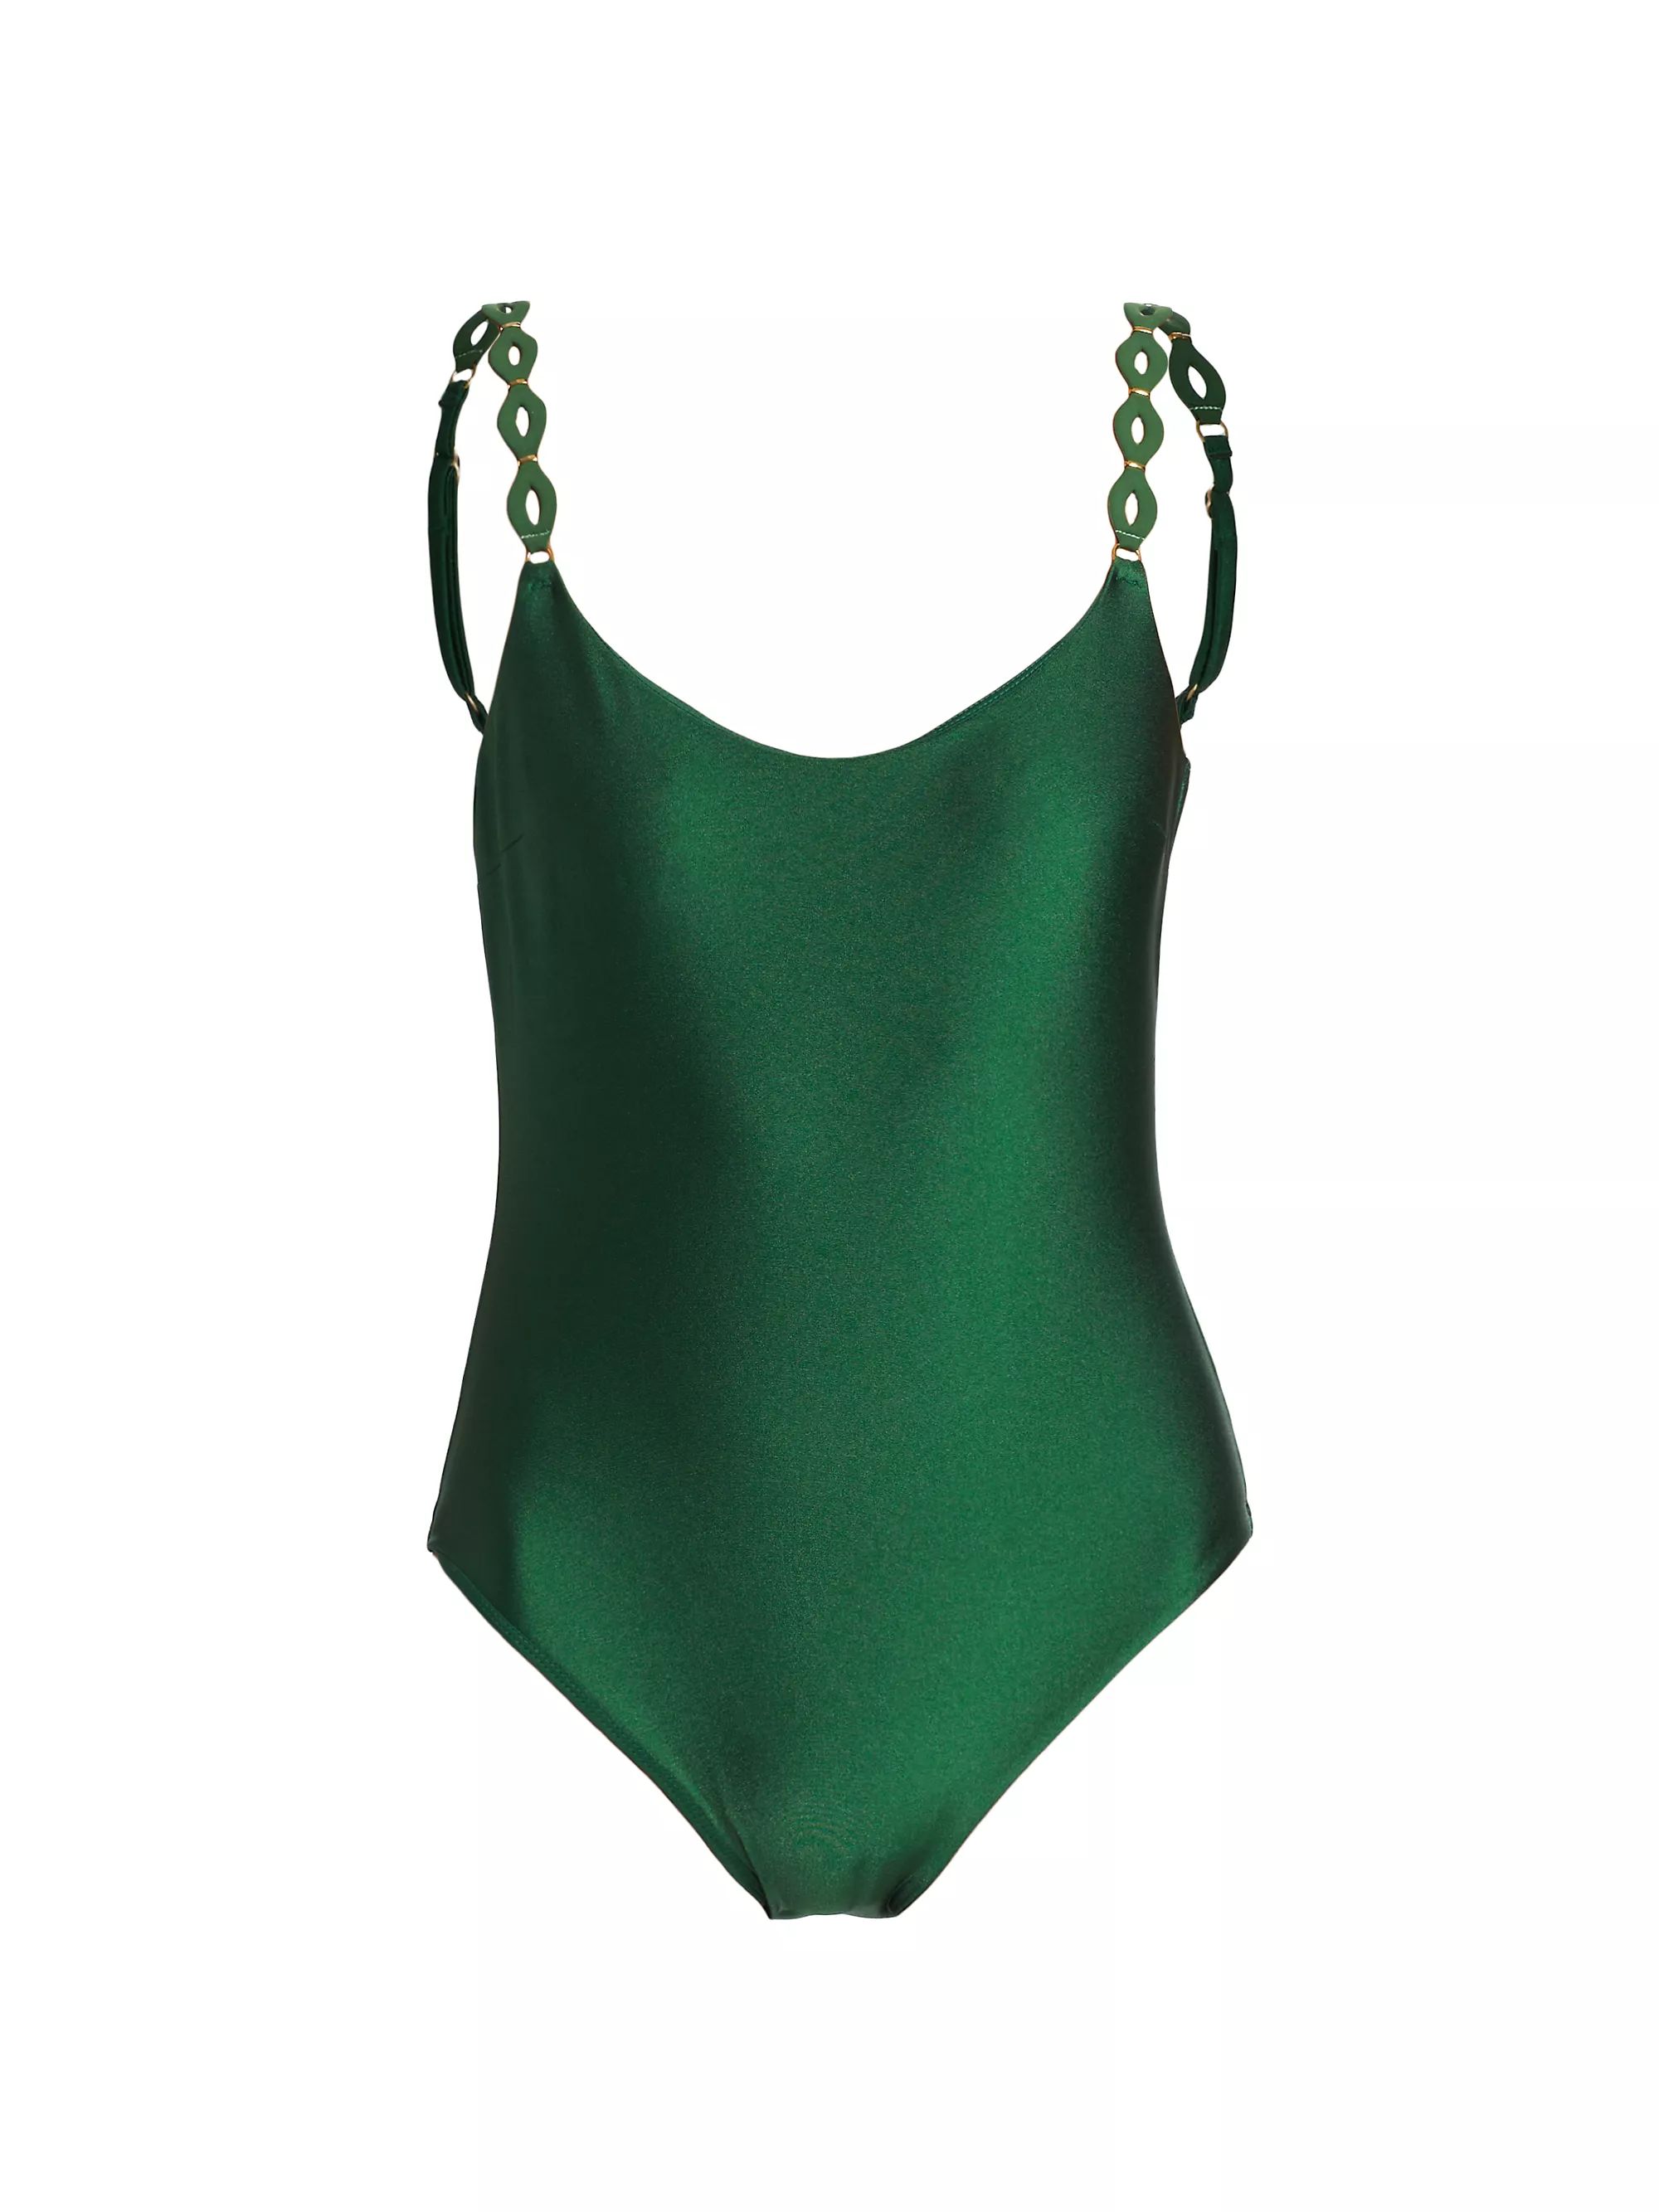 August Embellished-Strap One-Piece Swimsuit | Saks Fifth Avenue